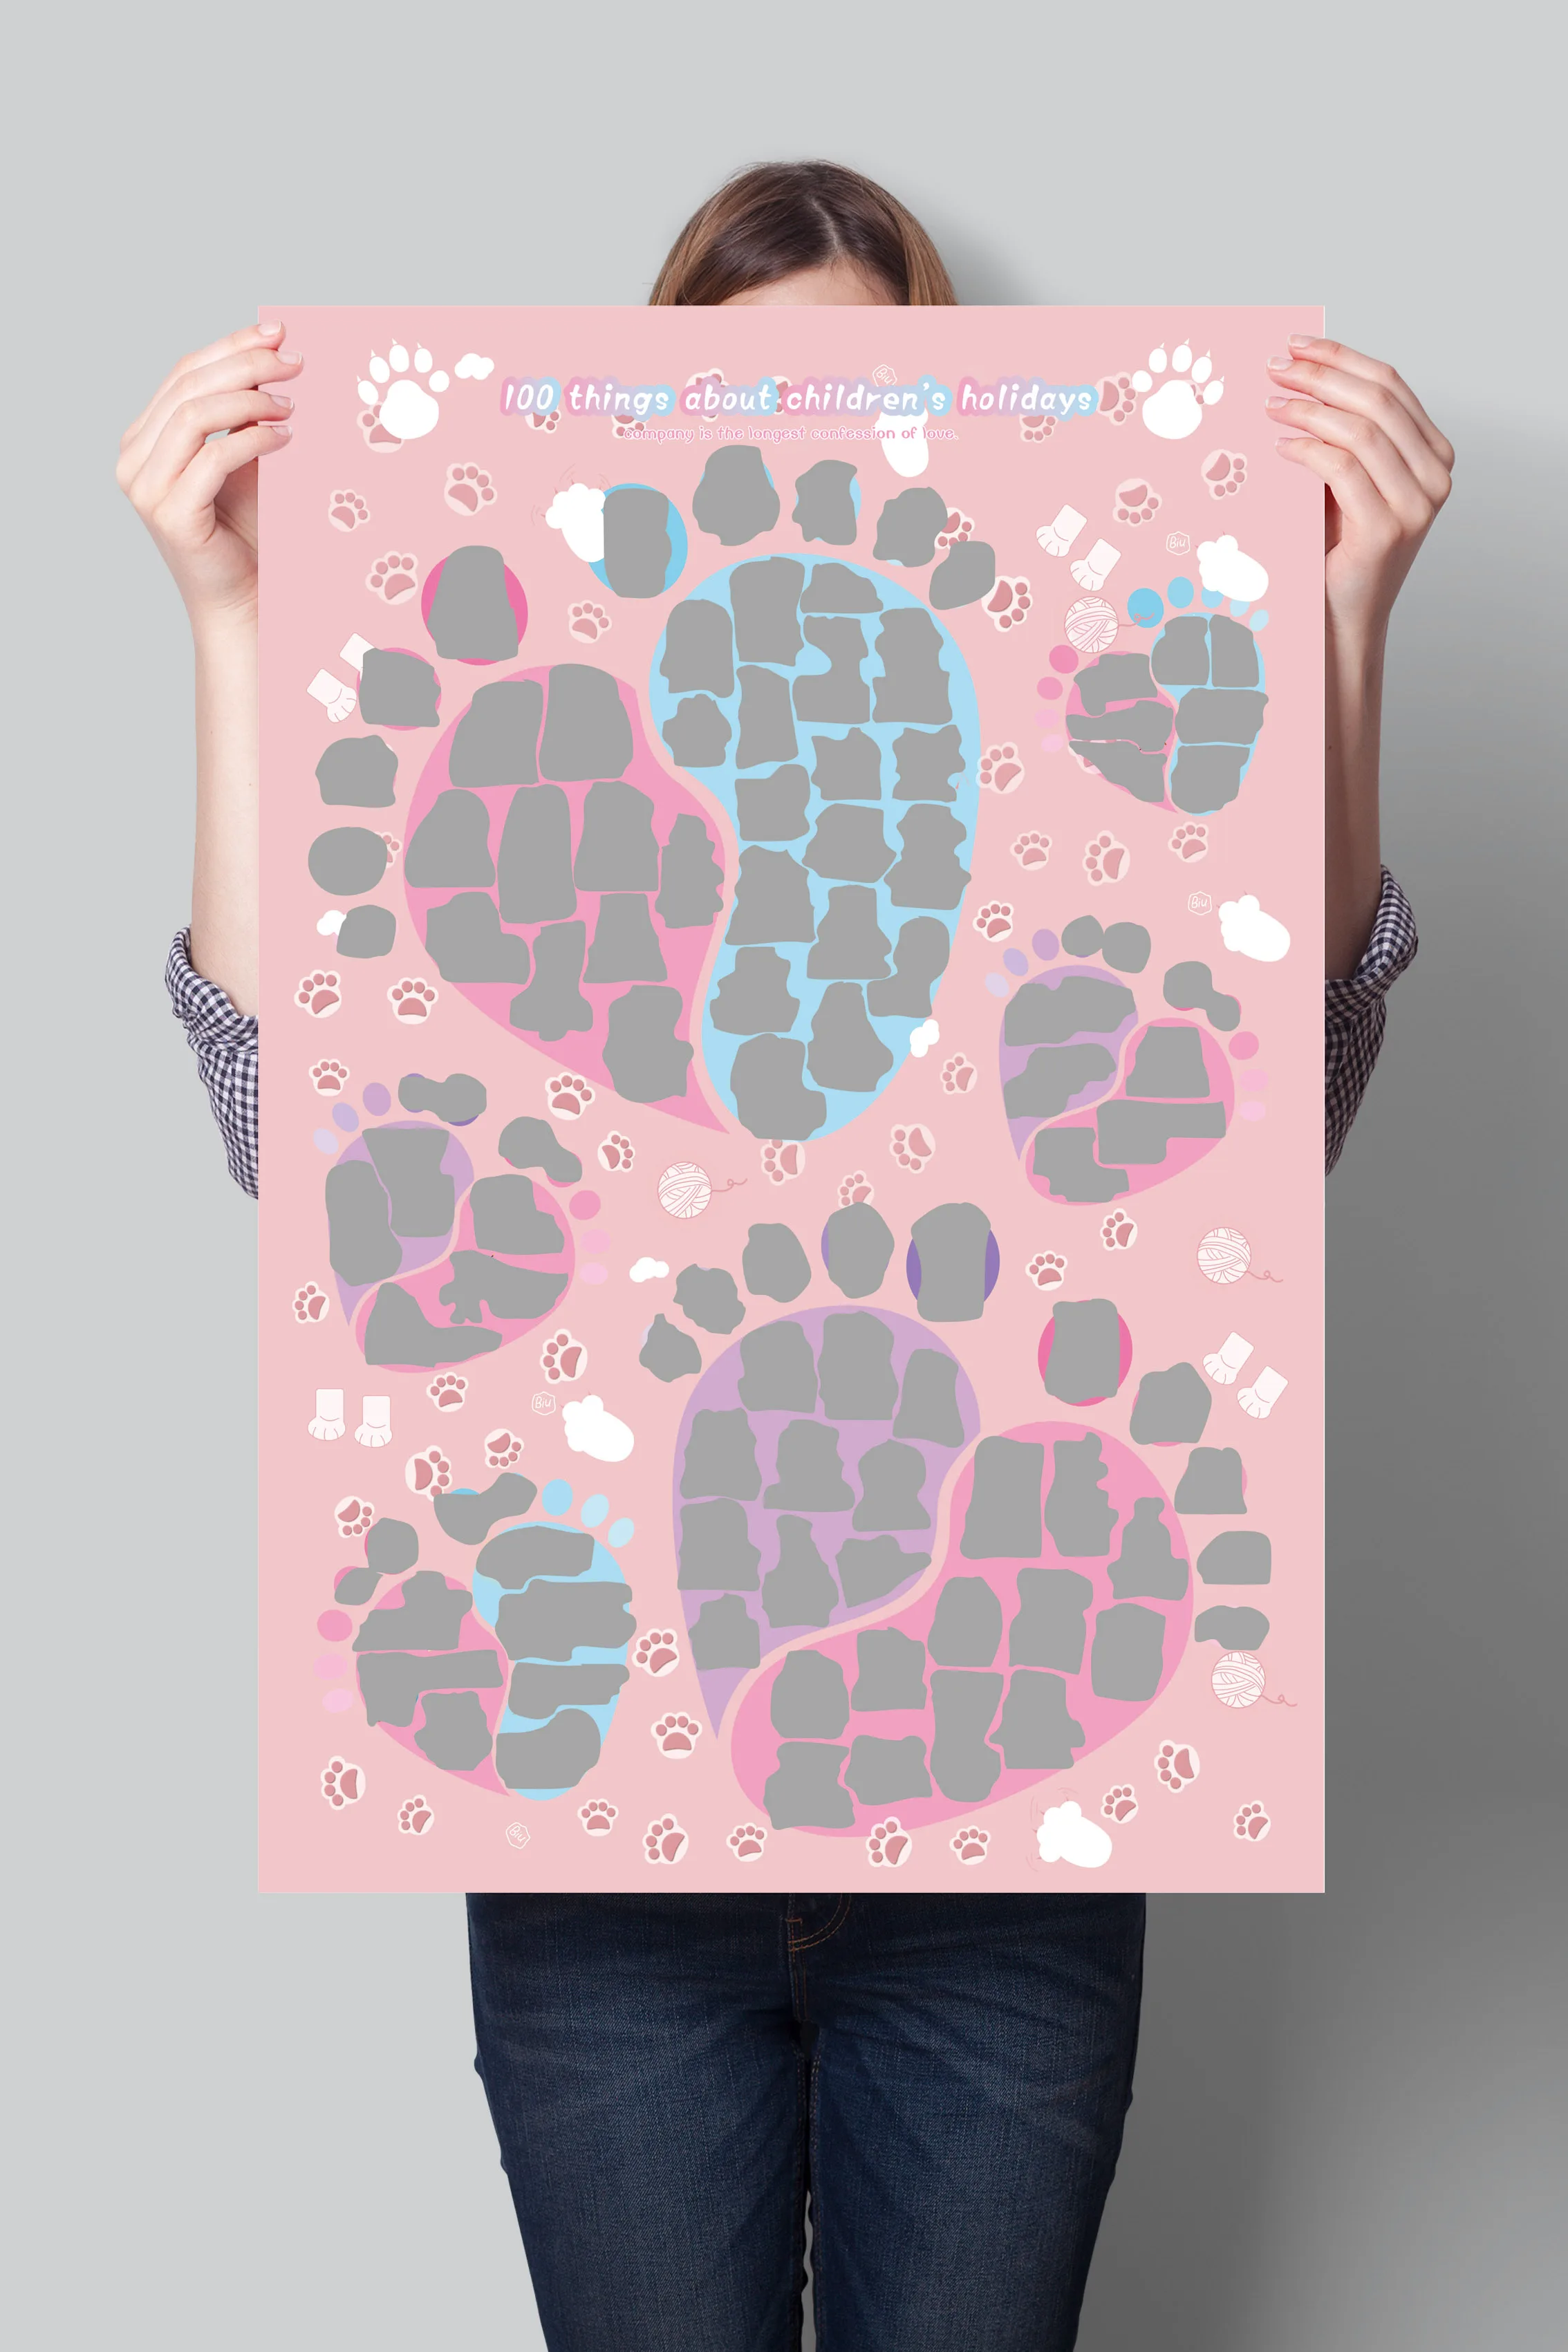 Pink And Blue Design For Baby Girl 100 Things To Do With Your Children Scratch Off Bucket List Poster For Baby Shower Gift